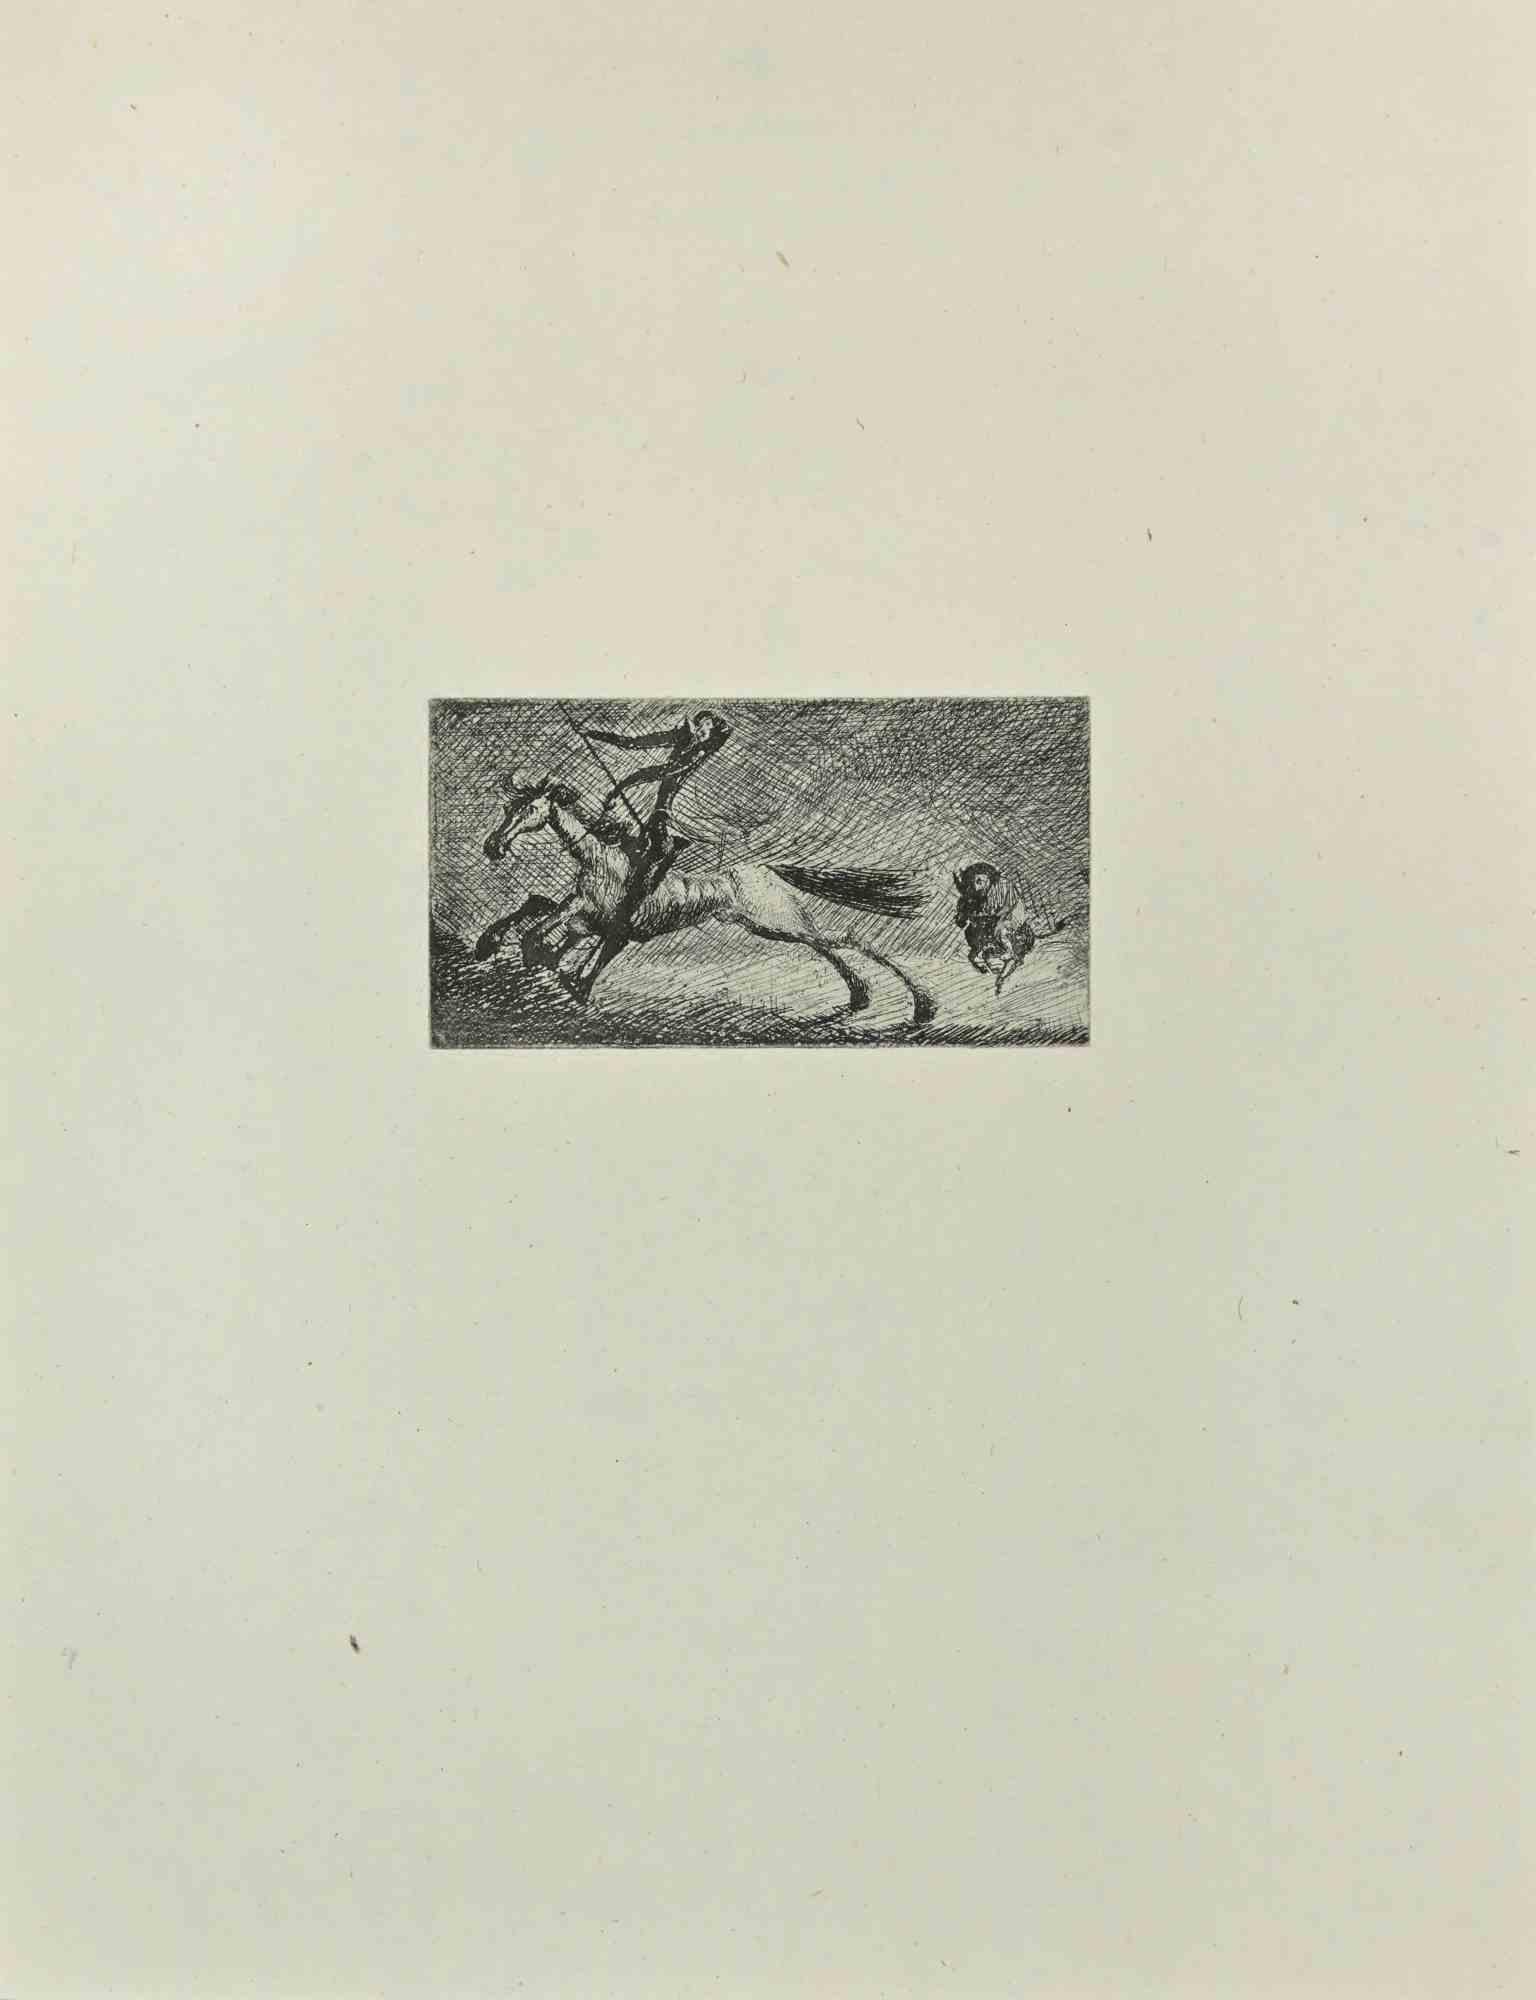 Don Quixote  Galloping is an etching and drypoint print on ivory-colored China paper, realized by Wladyslaw Jahl in 1951.

It belongs to a limited edition of 125 specimens.

Good conditions.

The artwork represents a visual scene from Don Quixote